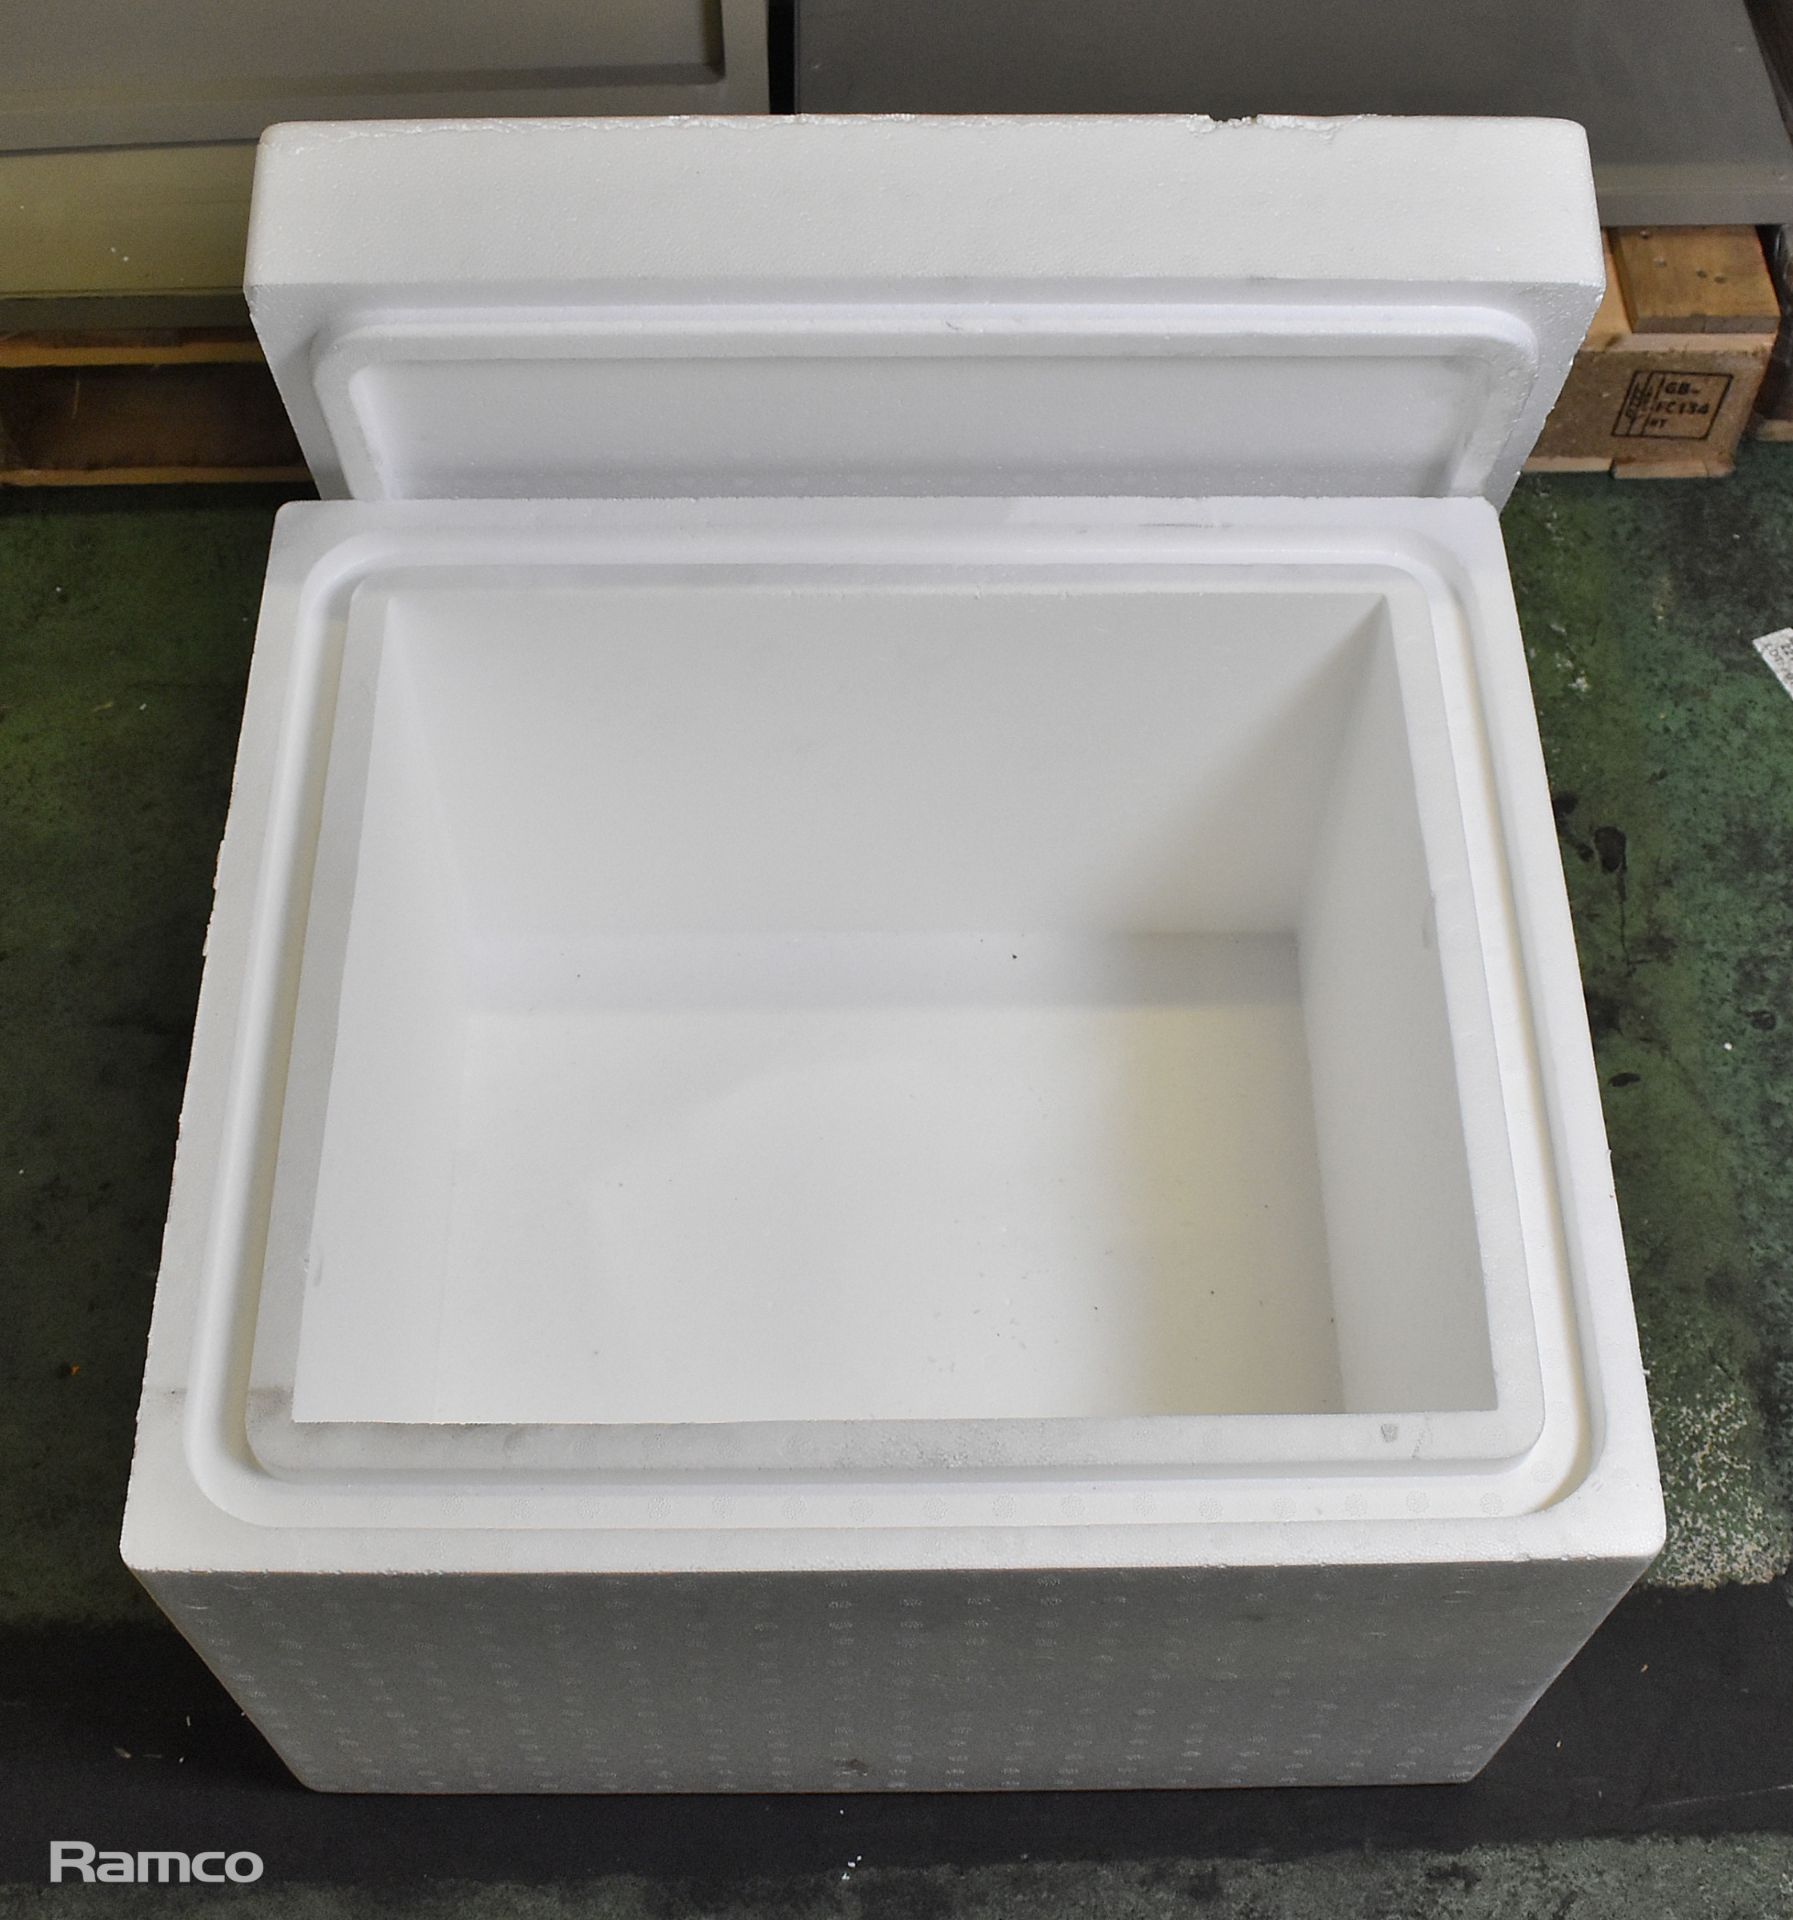 2x Pallets of polystyrene type containers with lids at 55x49x40cm - 8 containers per pallet - Image 4 of 5